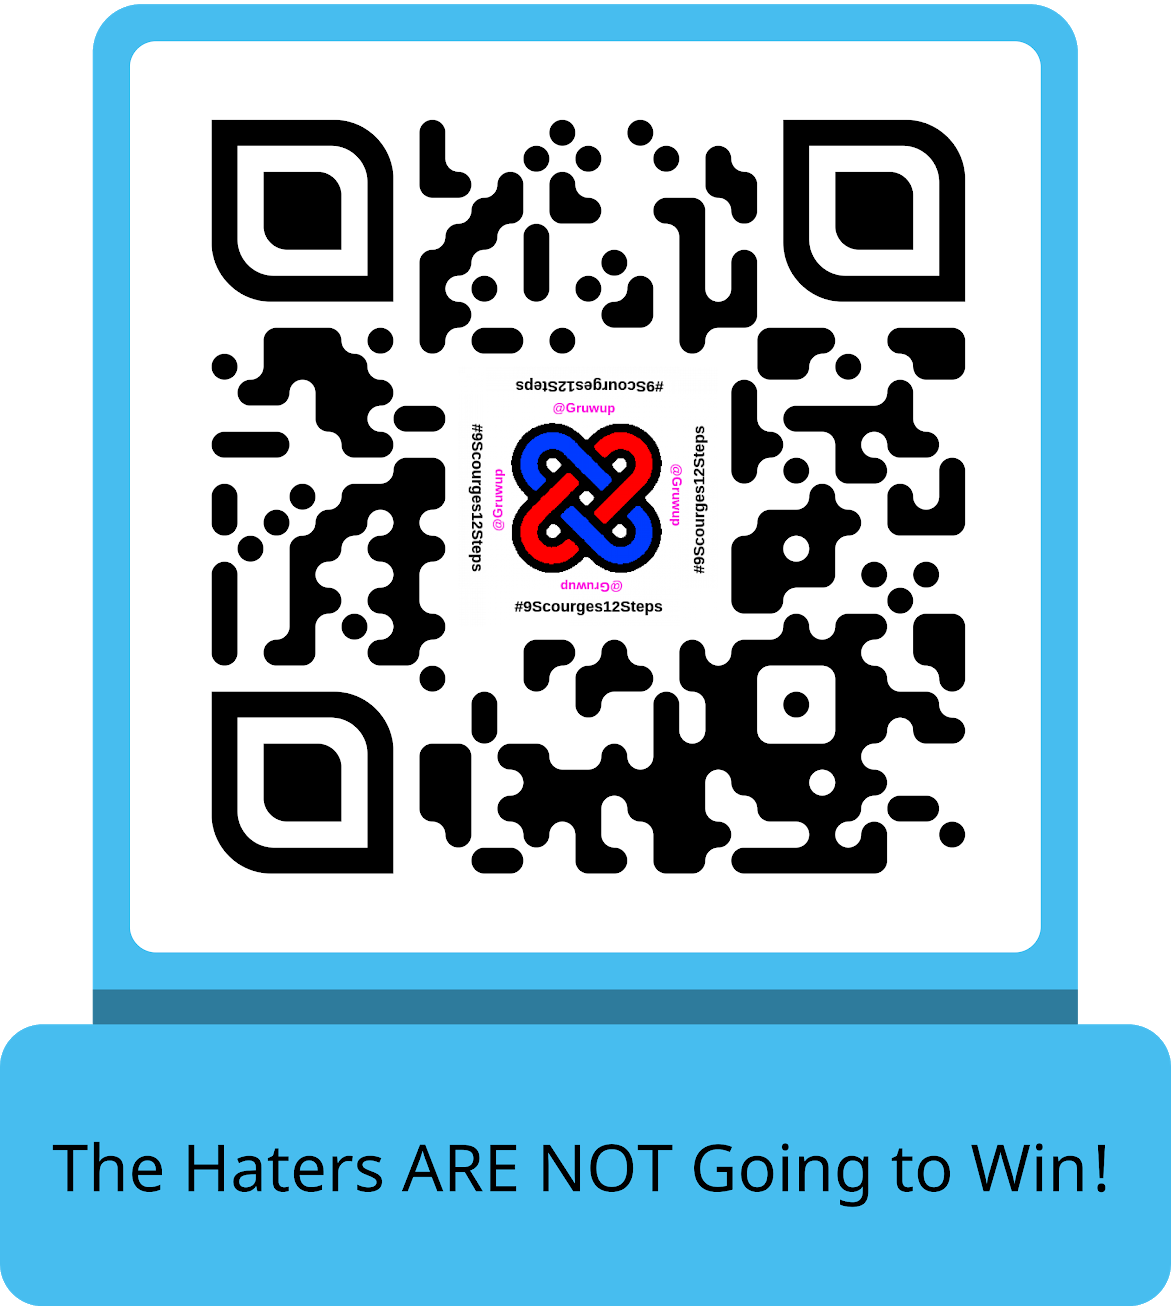 The_Haters_ARE_NOT_going_to_be_ALLOWED_to_WIN_-_No_FuckedUpHuman_Net_Way_Block_Them_Out_of_Power_-_Every_Way_But_Loose_ (1).png